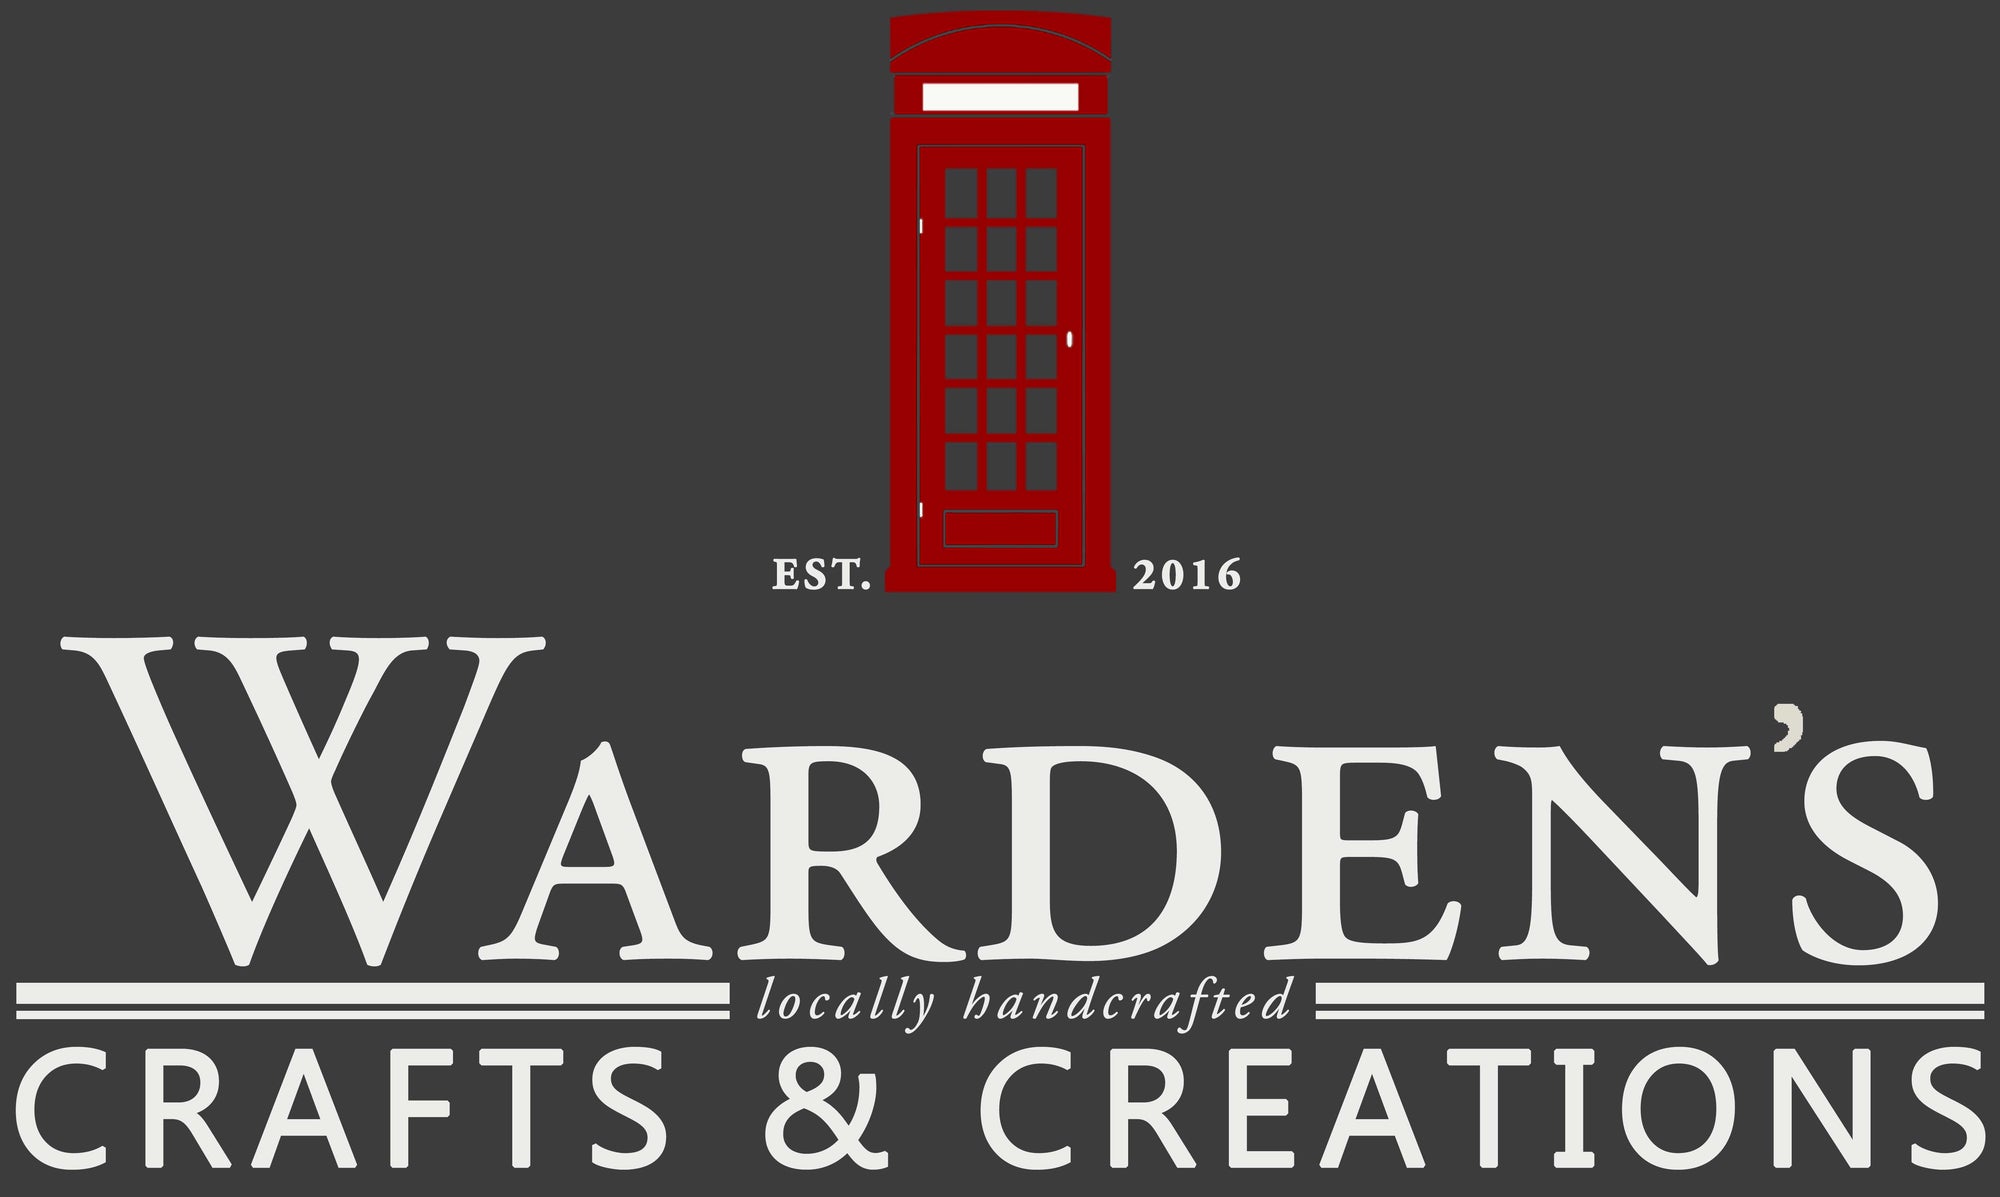 Warden's Crafts & Creations logo home page